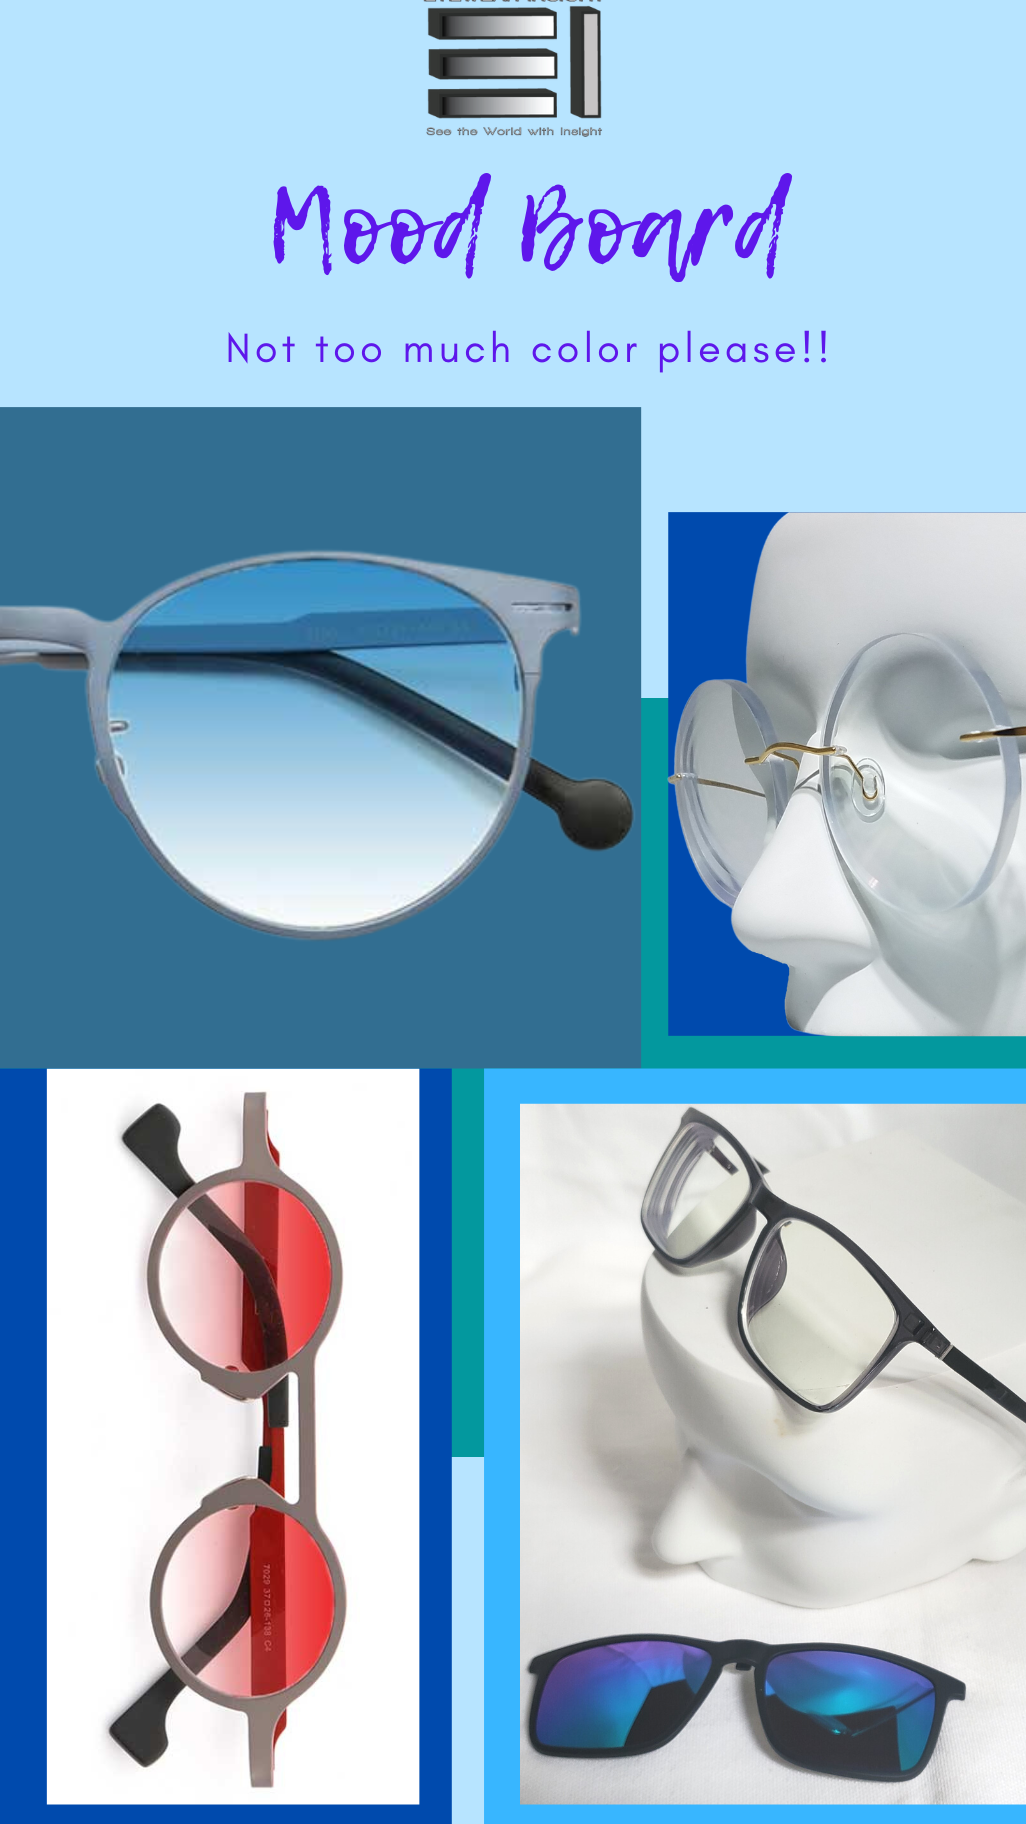 Get Affordable Transitional Eyeglasses With A Cat-Eye Frame At This Online Store